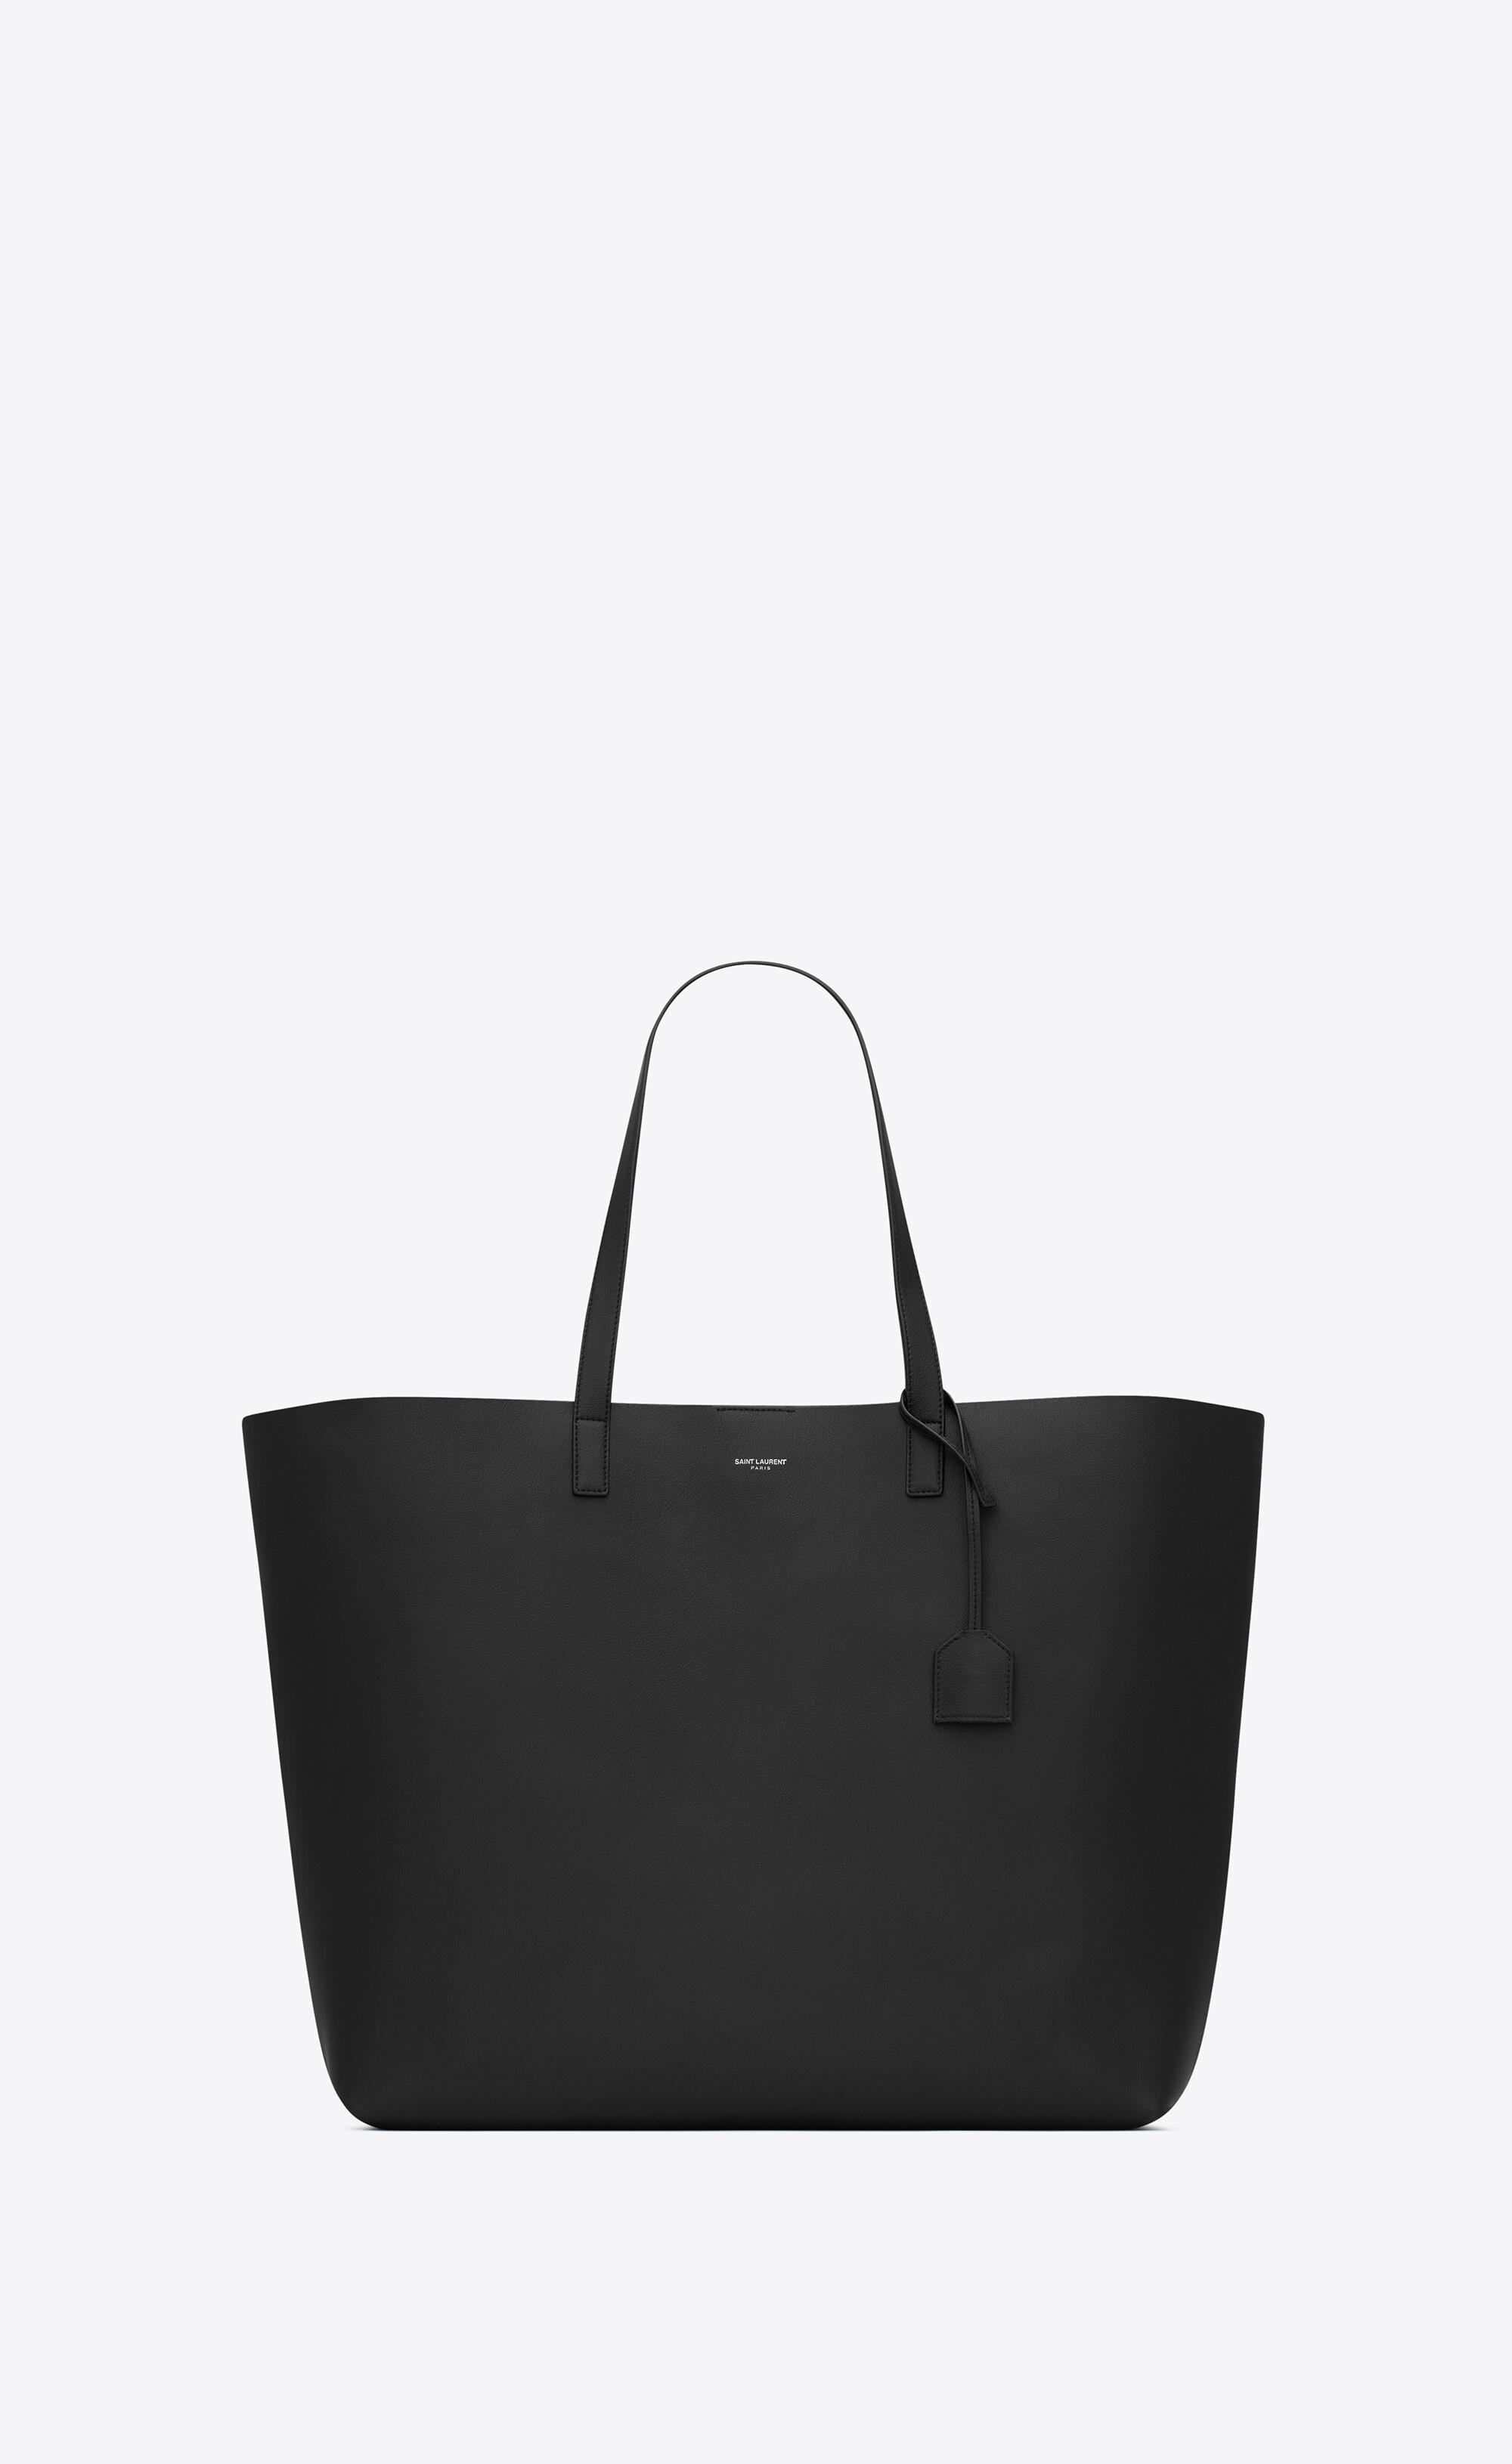 Saint Laurent Rive Gauche (North-South) Small Tote Review! 